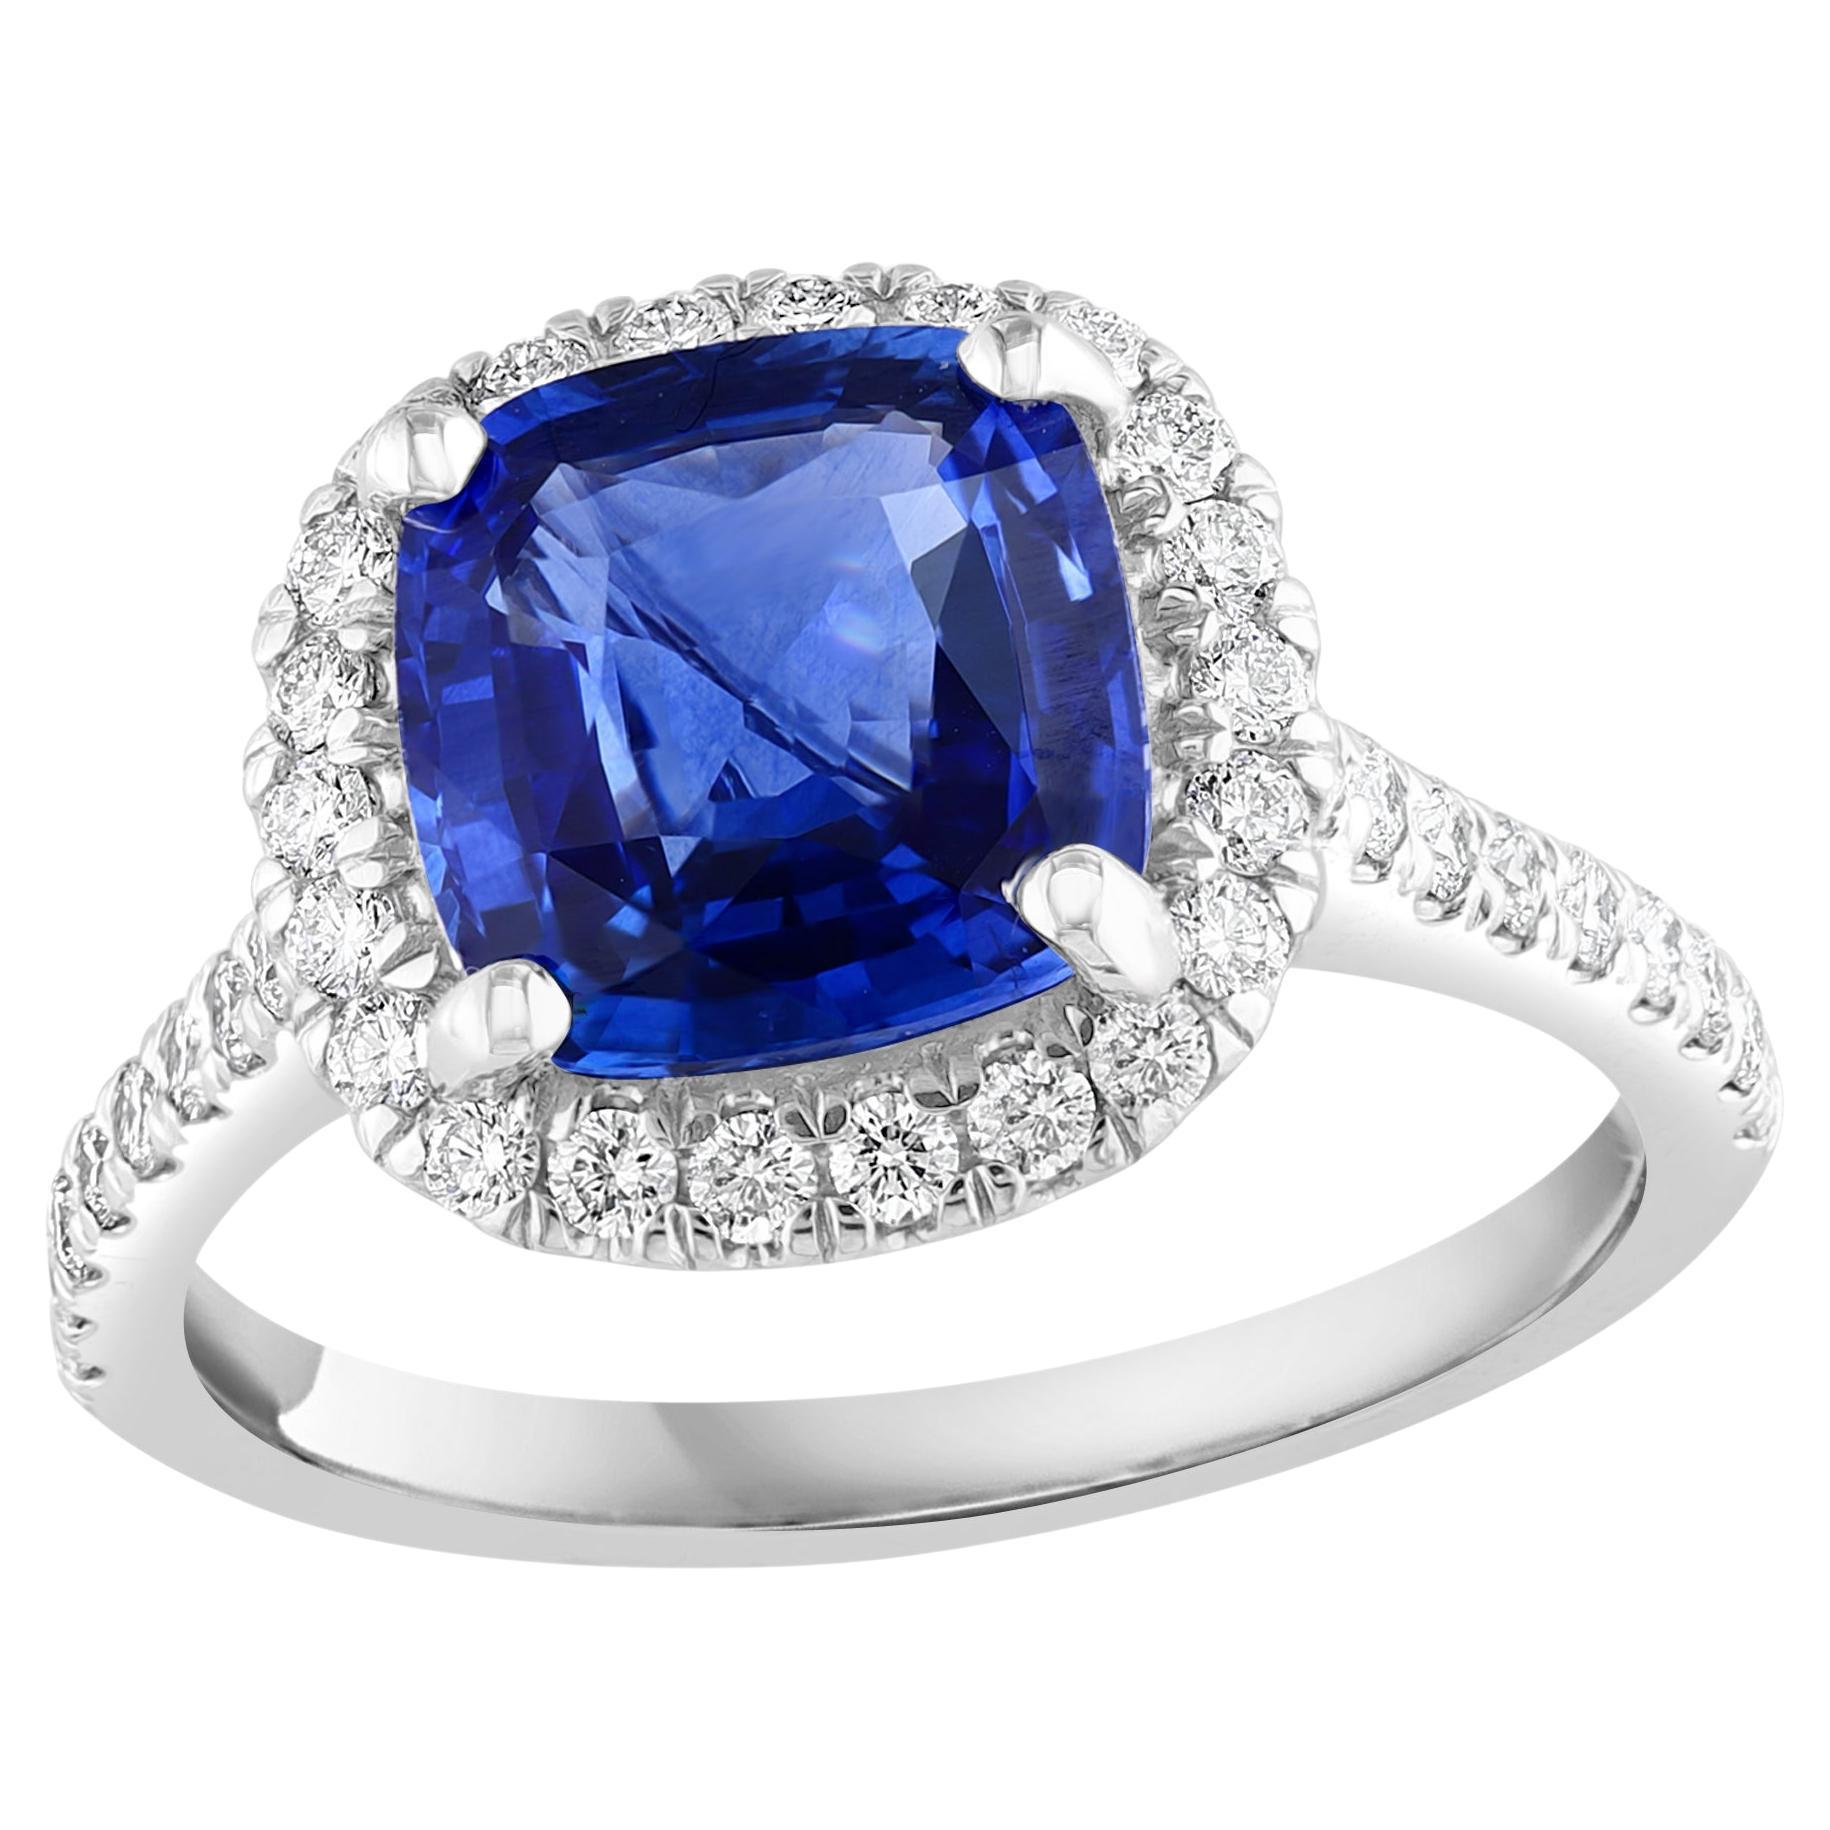 3.07 Carat Cushion Cut Sapphire and Diamond Halo Ring in Platinum For Sale